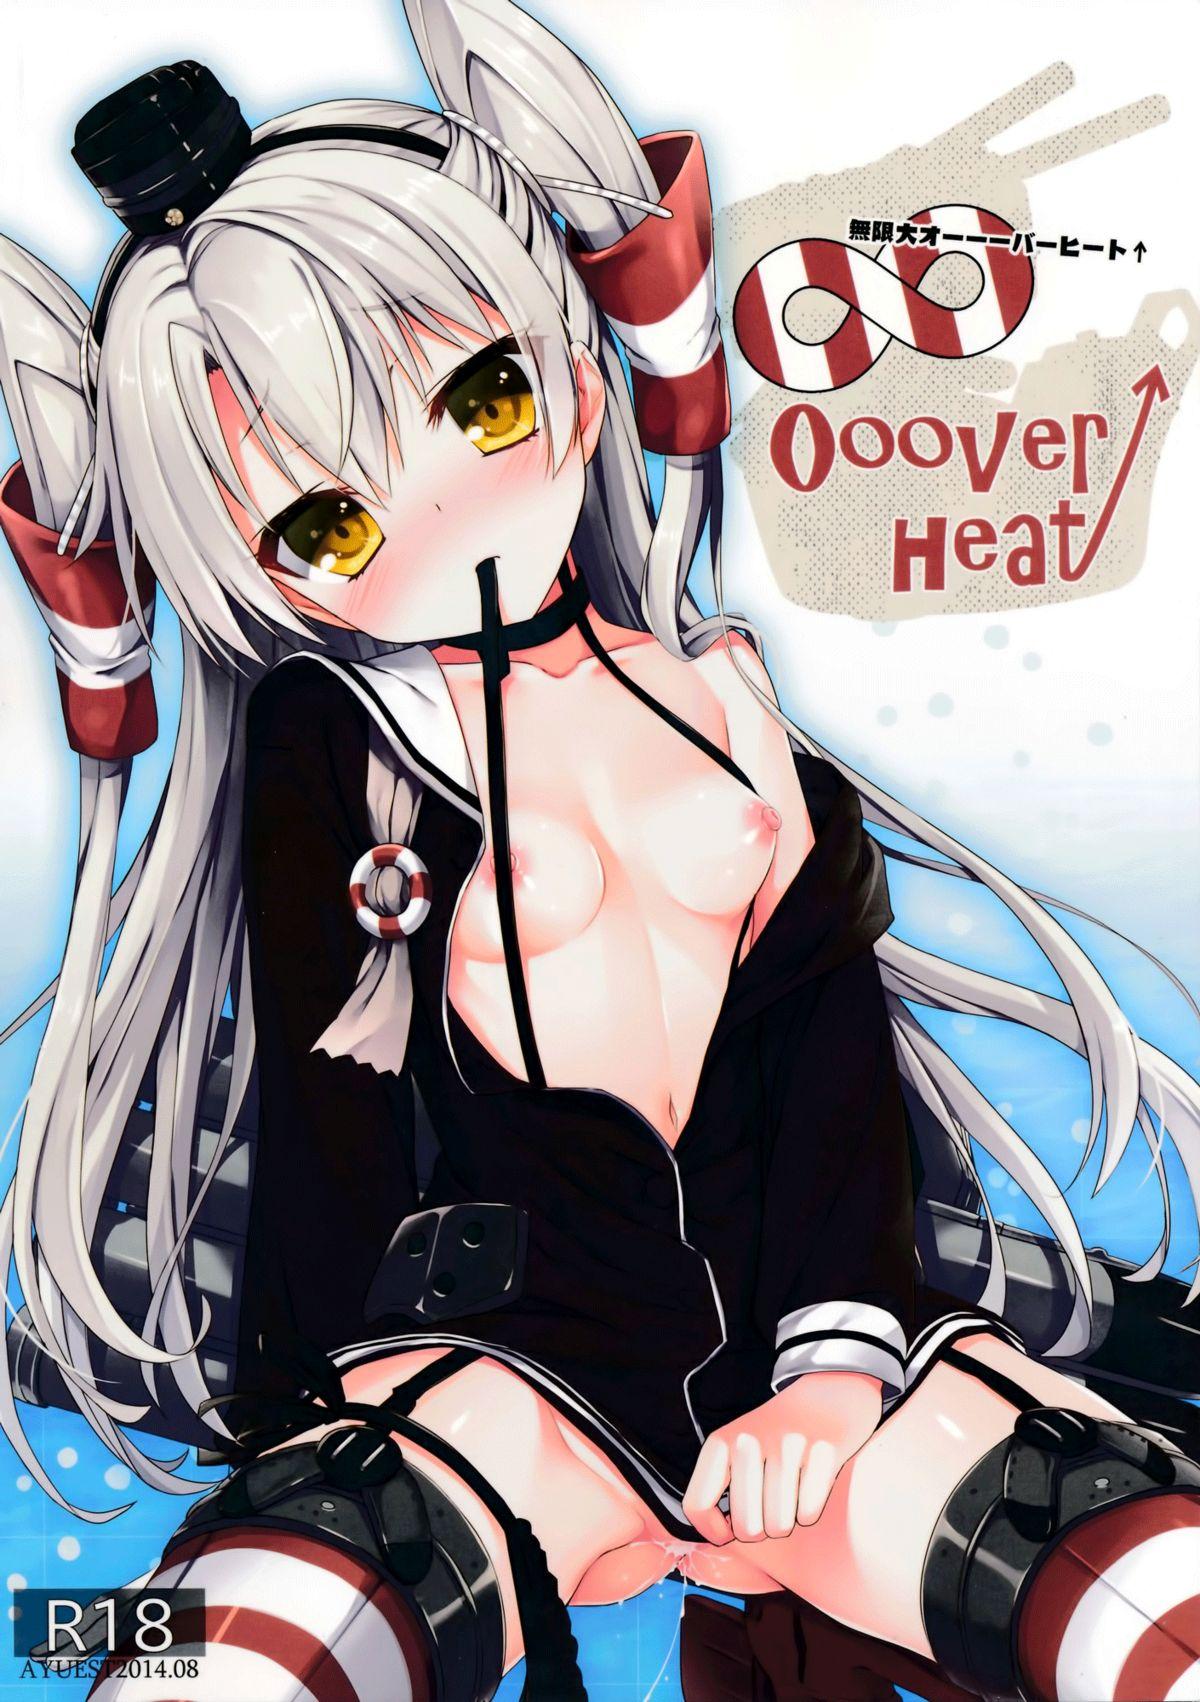 Husband ∞Oooverheat↑ - Kantai collection Colombiana - Picture 1